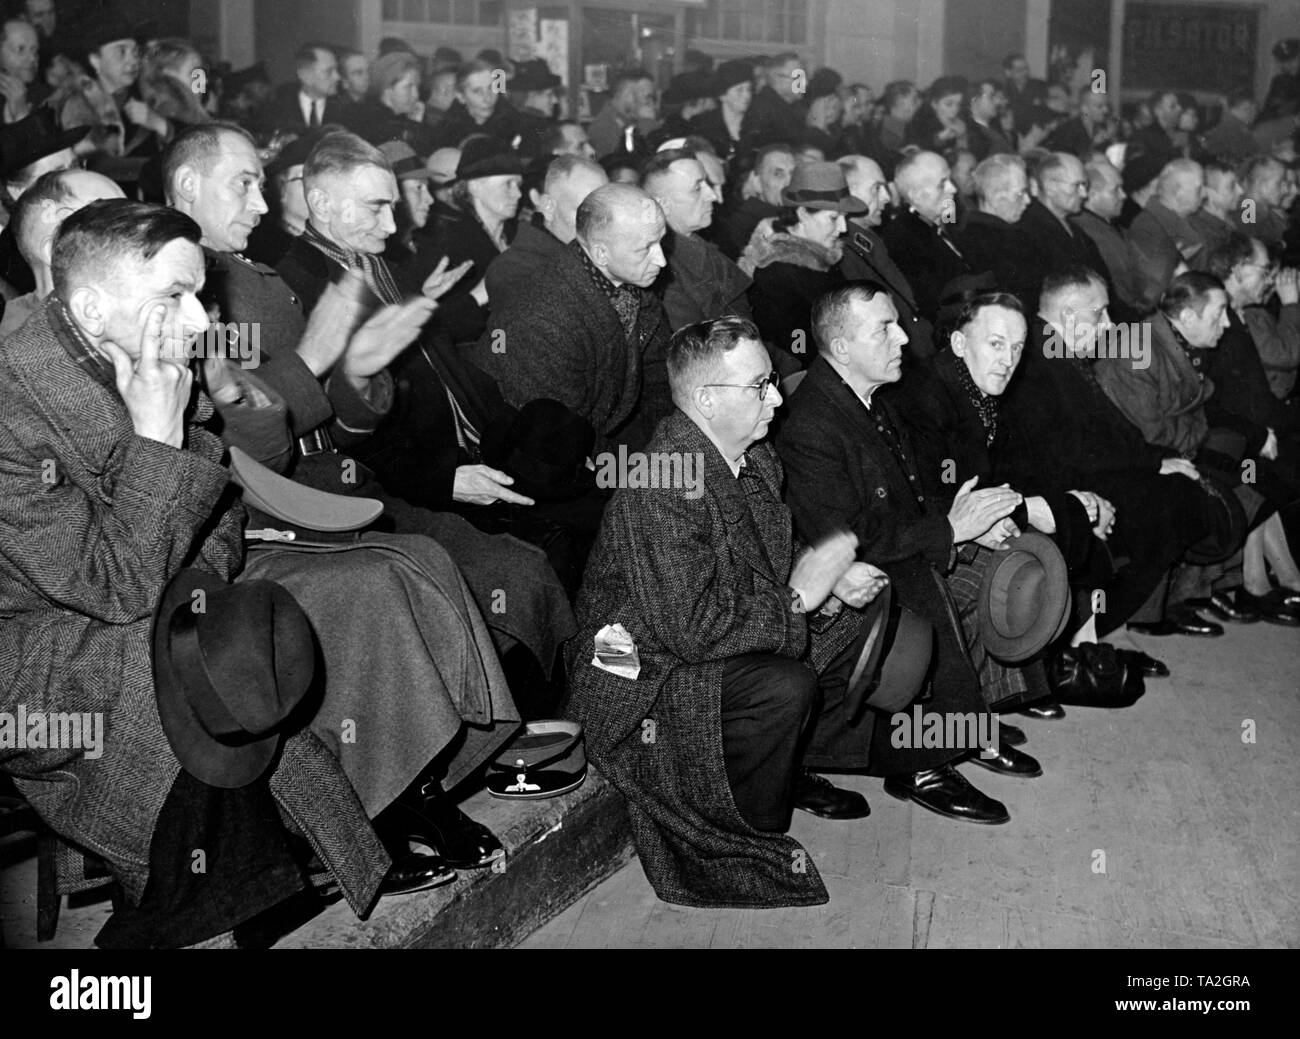 View of the crowded Sportpalast during Minister of Propaganda Joseph Goebbels's speech. Photo: Schwahn Stock Photo